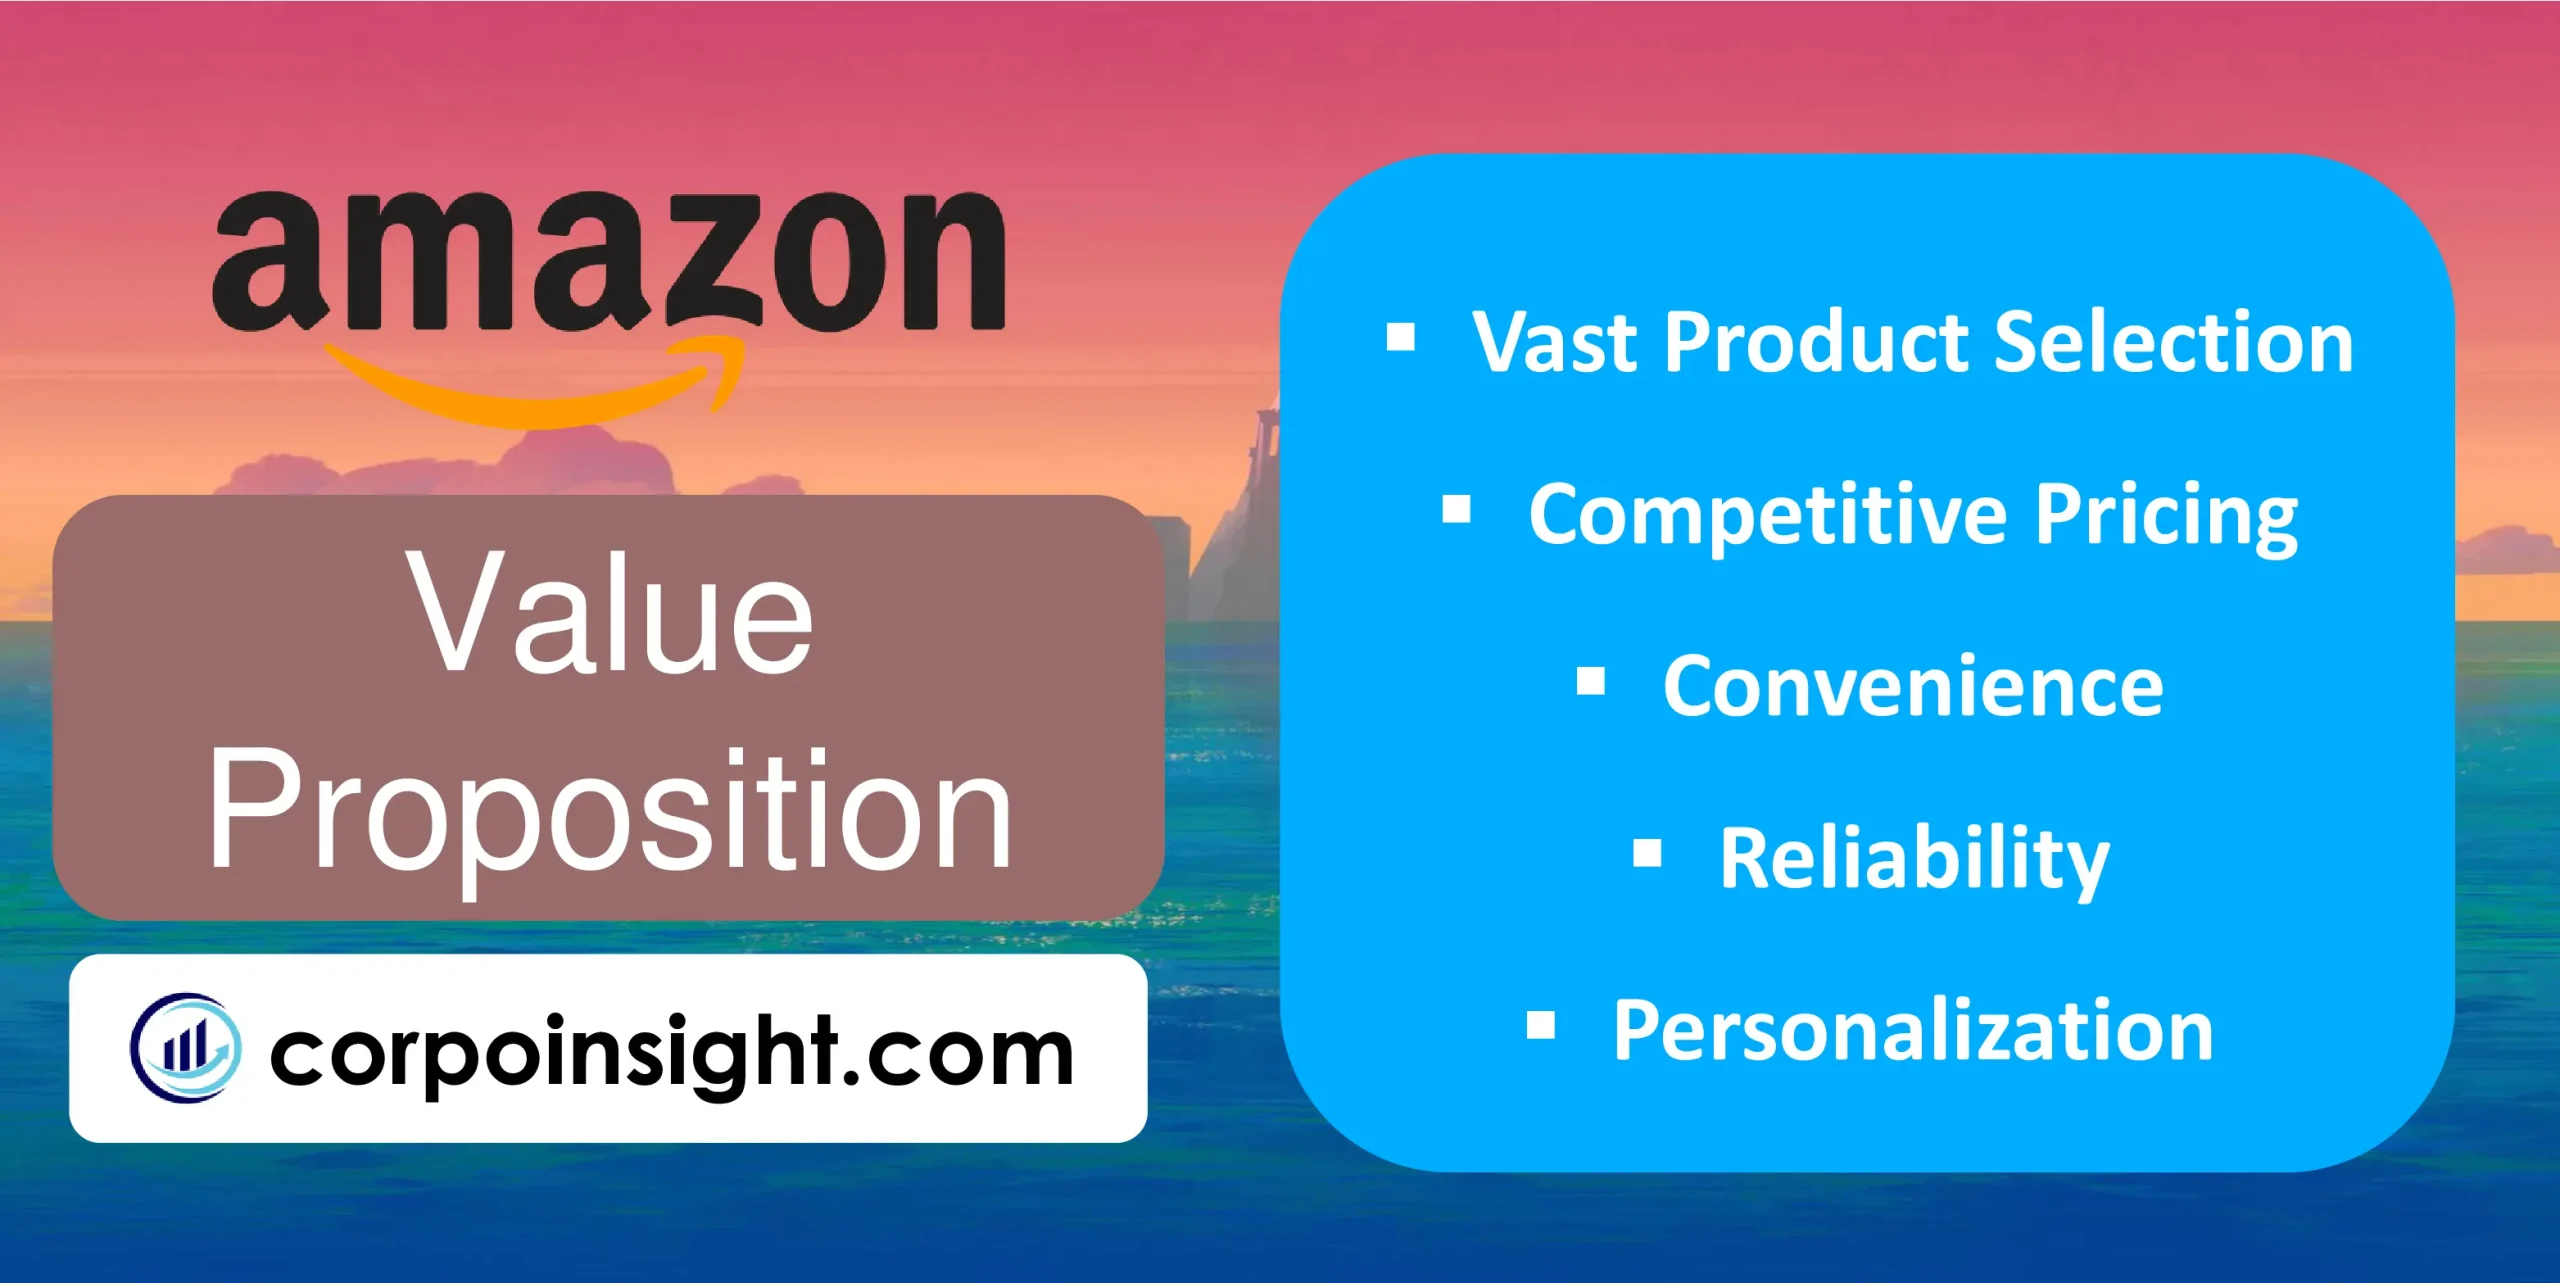 Value Proposition of Amazon